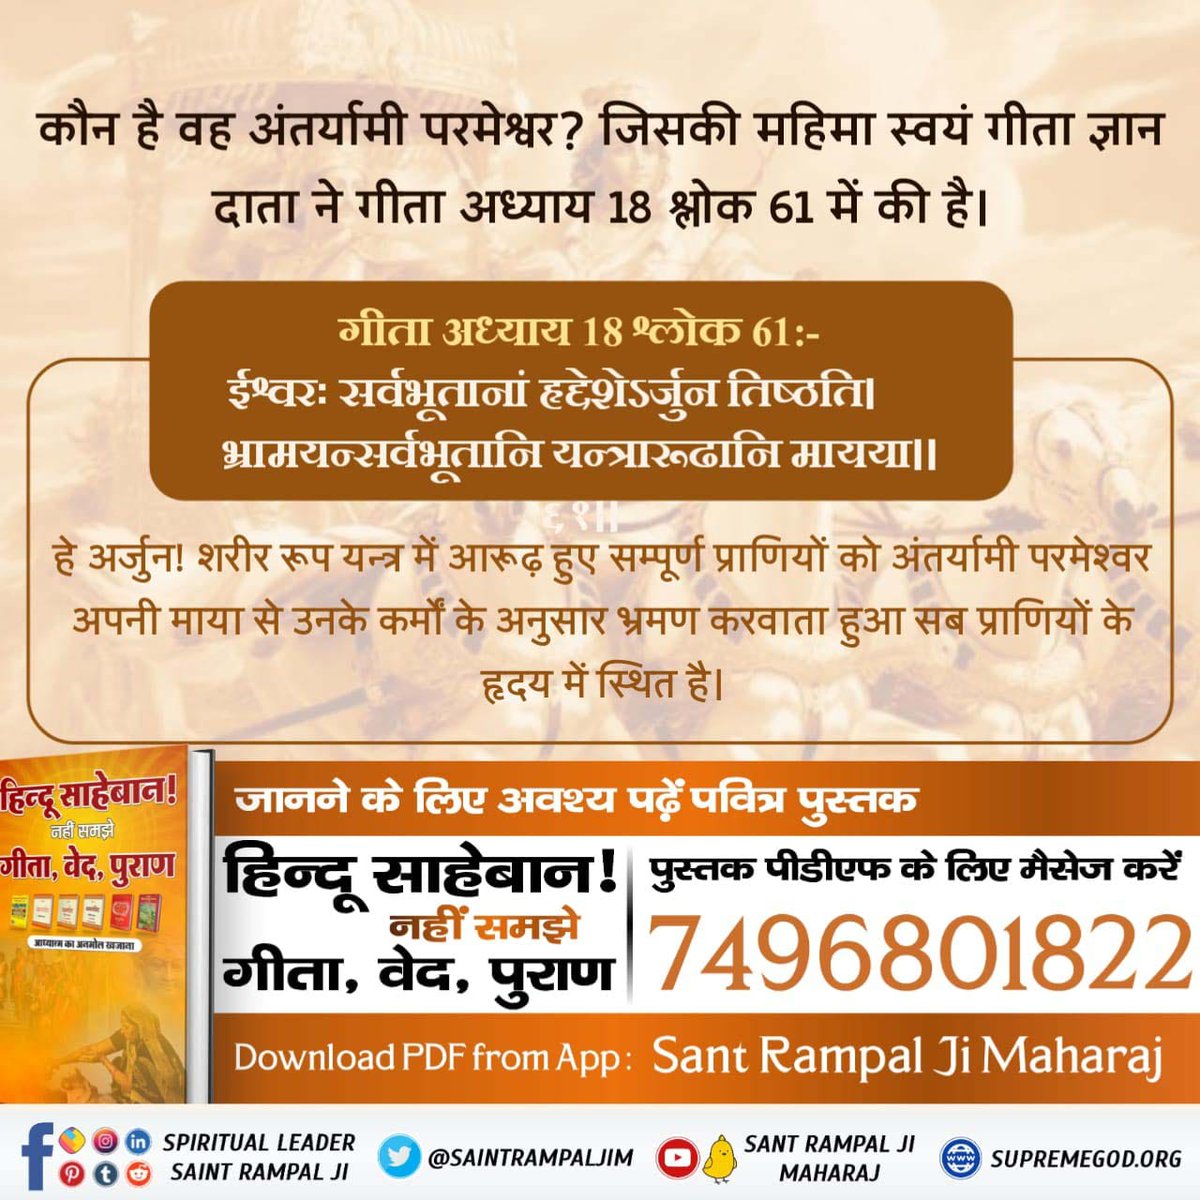 Geeta Ji Chapter 18 Verse 62 proves that the Supreme God is different from the giver of knowledge of Geeta. O India! To know more Hindu Saheb! If you did not understand Gita, Vedas, Puranas, download the book from SantRampalJiMaharaj App
#गीता_प्रभुदत्त_ज्ञान_है इसी को follow करे